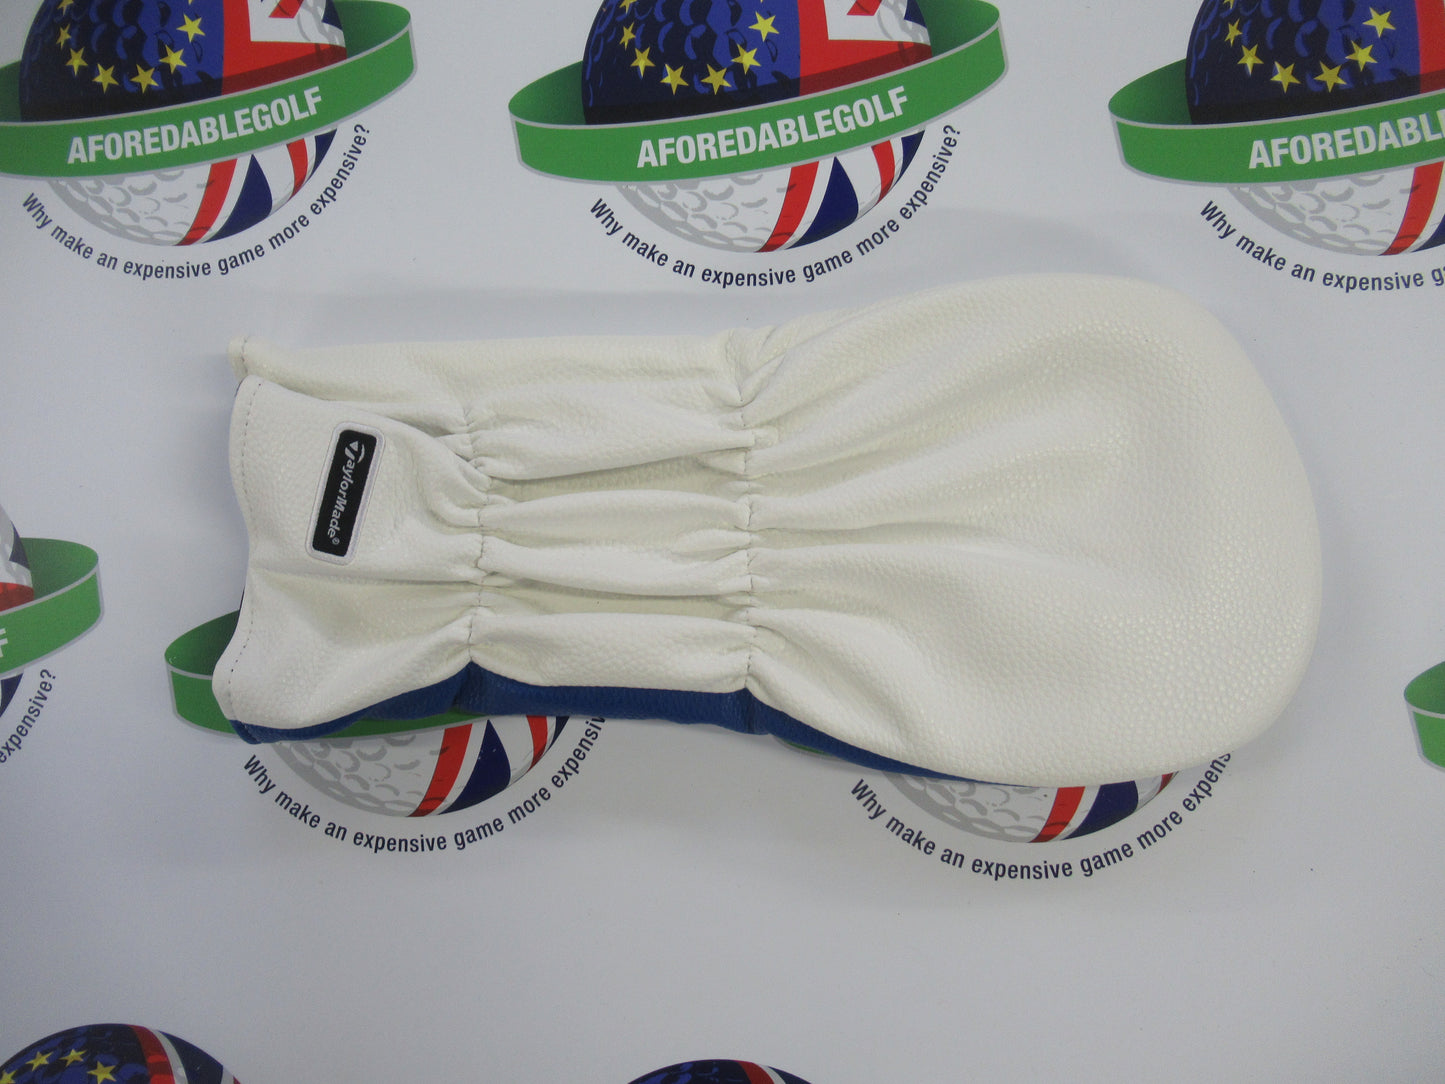 taylormade england driver head cover